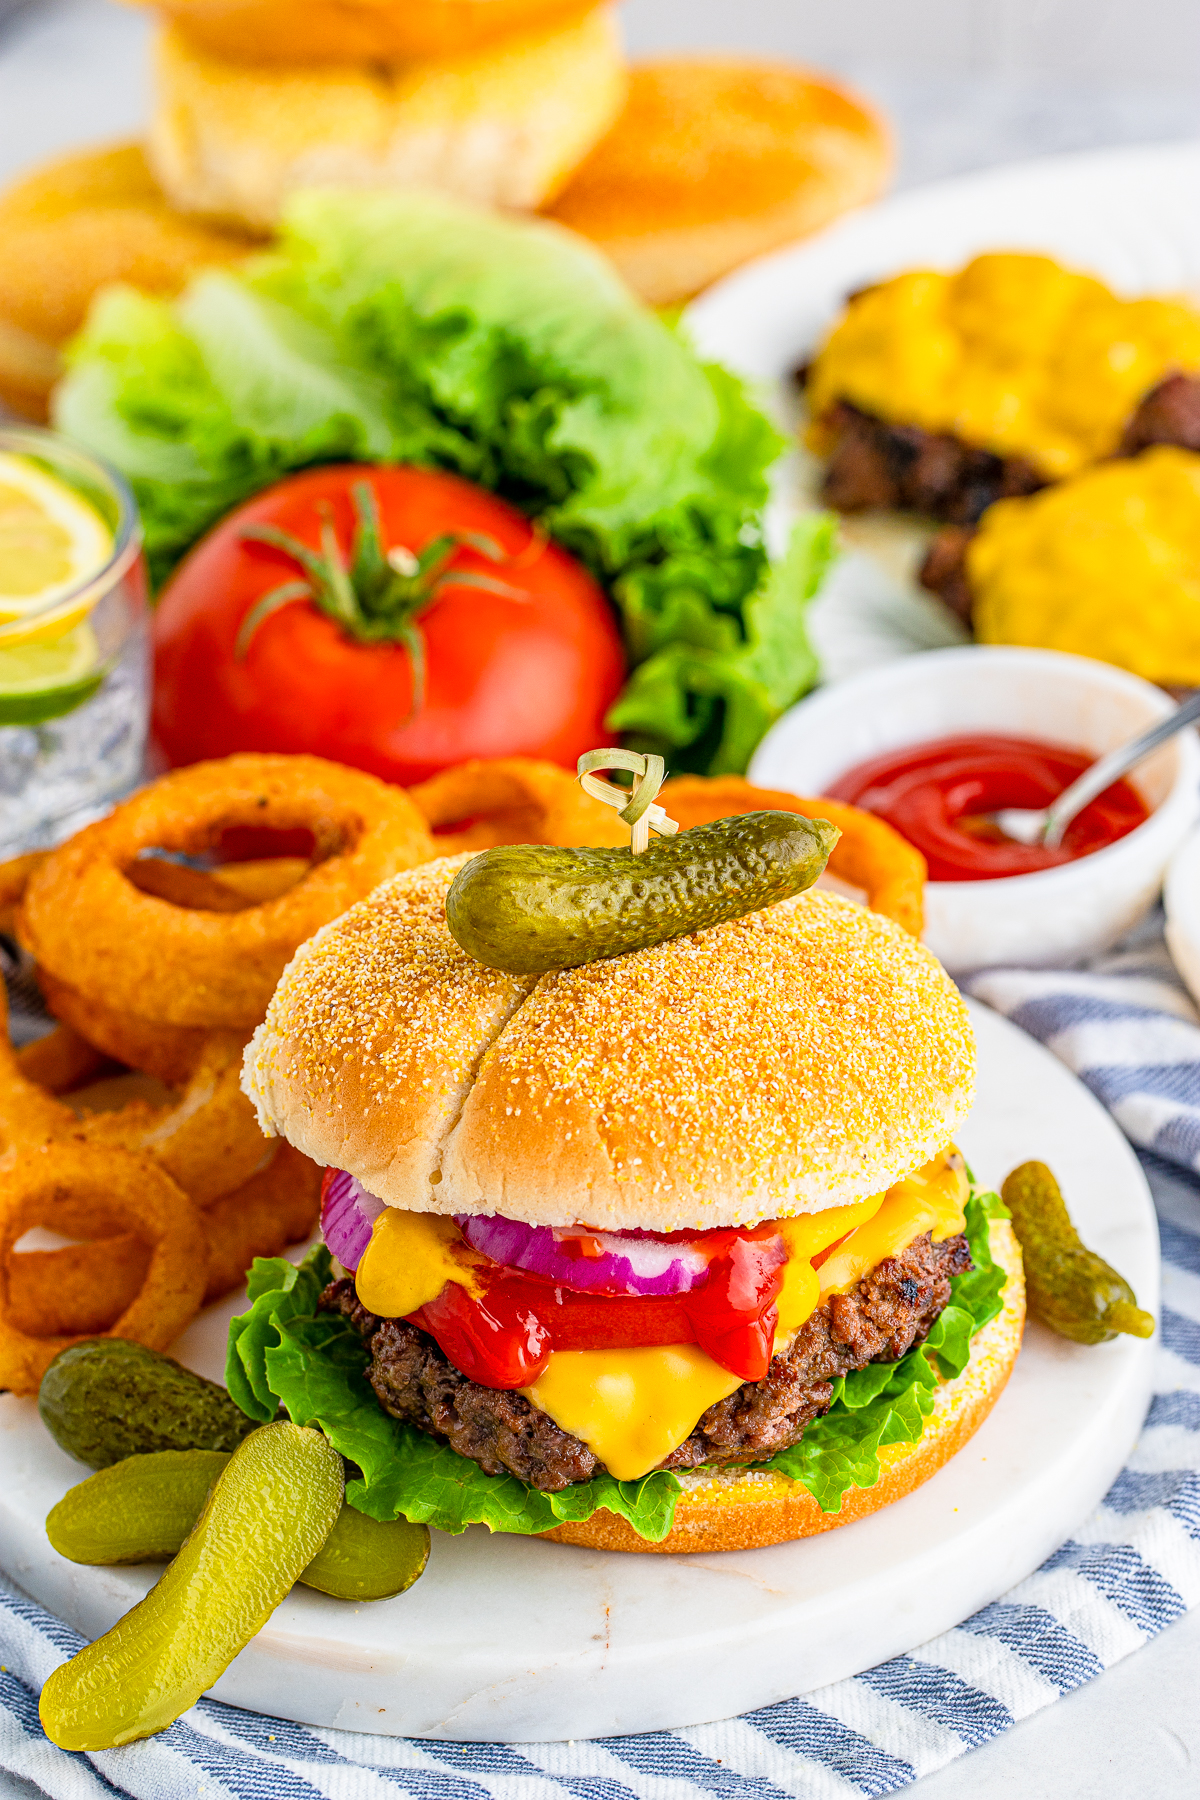 Cheeseburger on marble board with onion rings, pickles and more burgers and buns in background